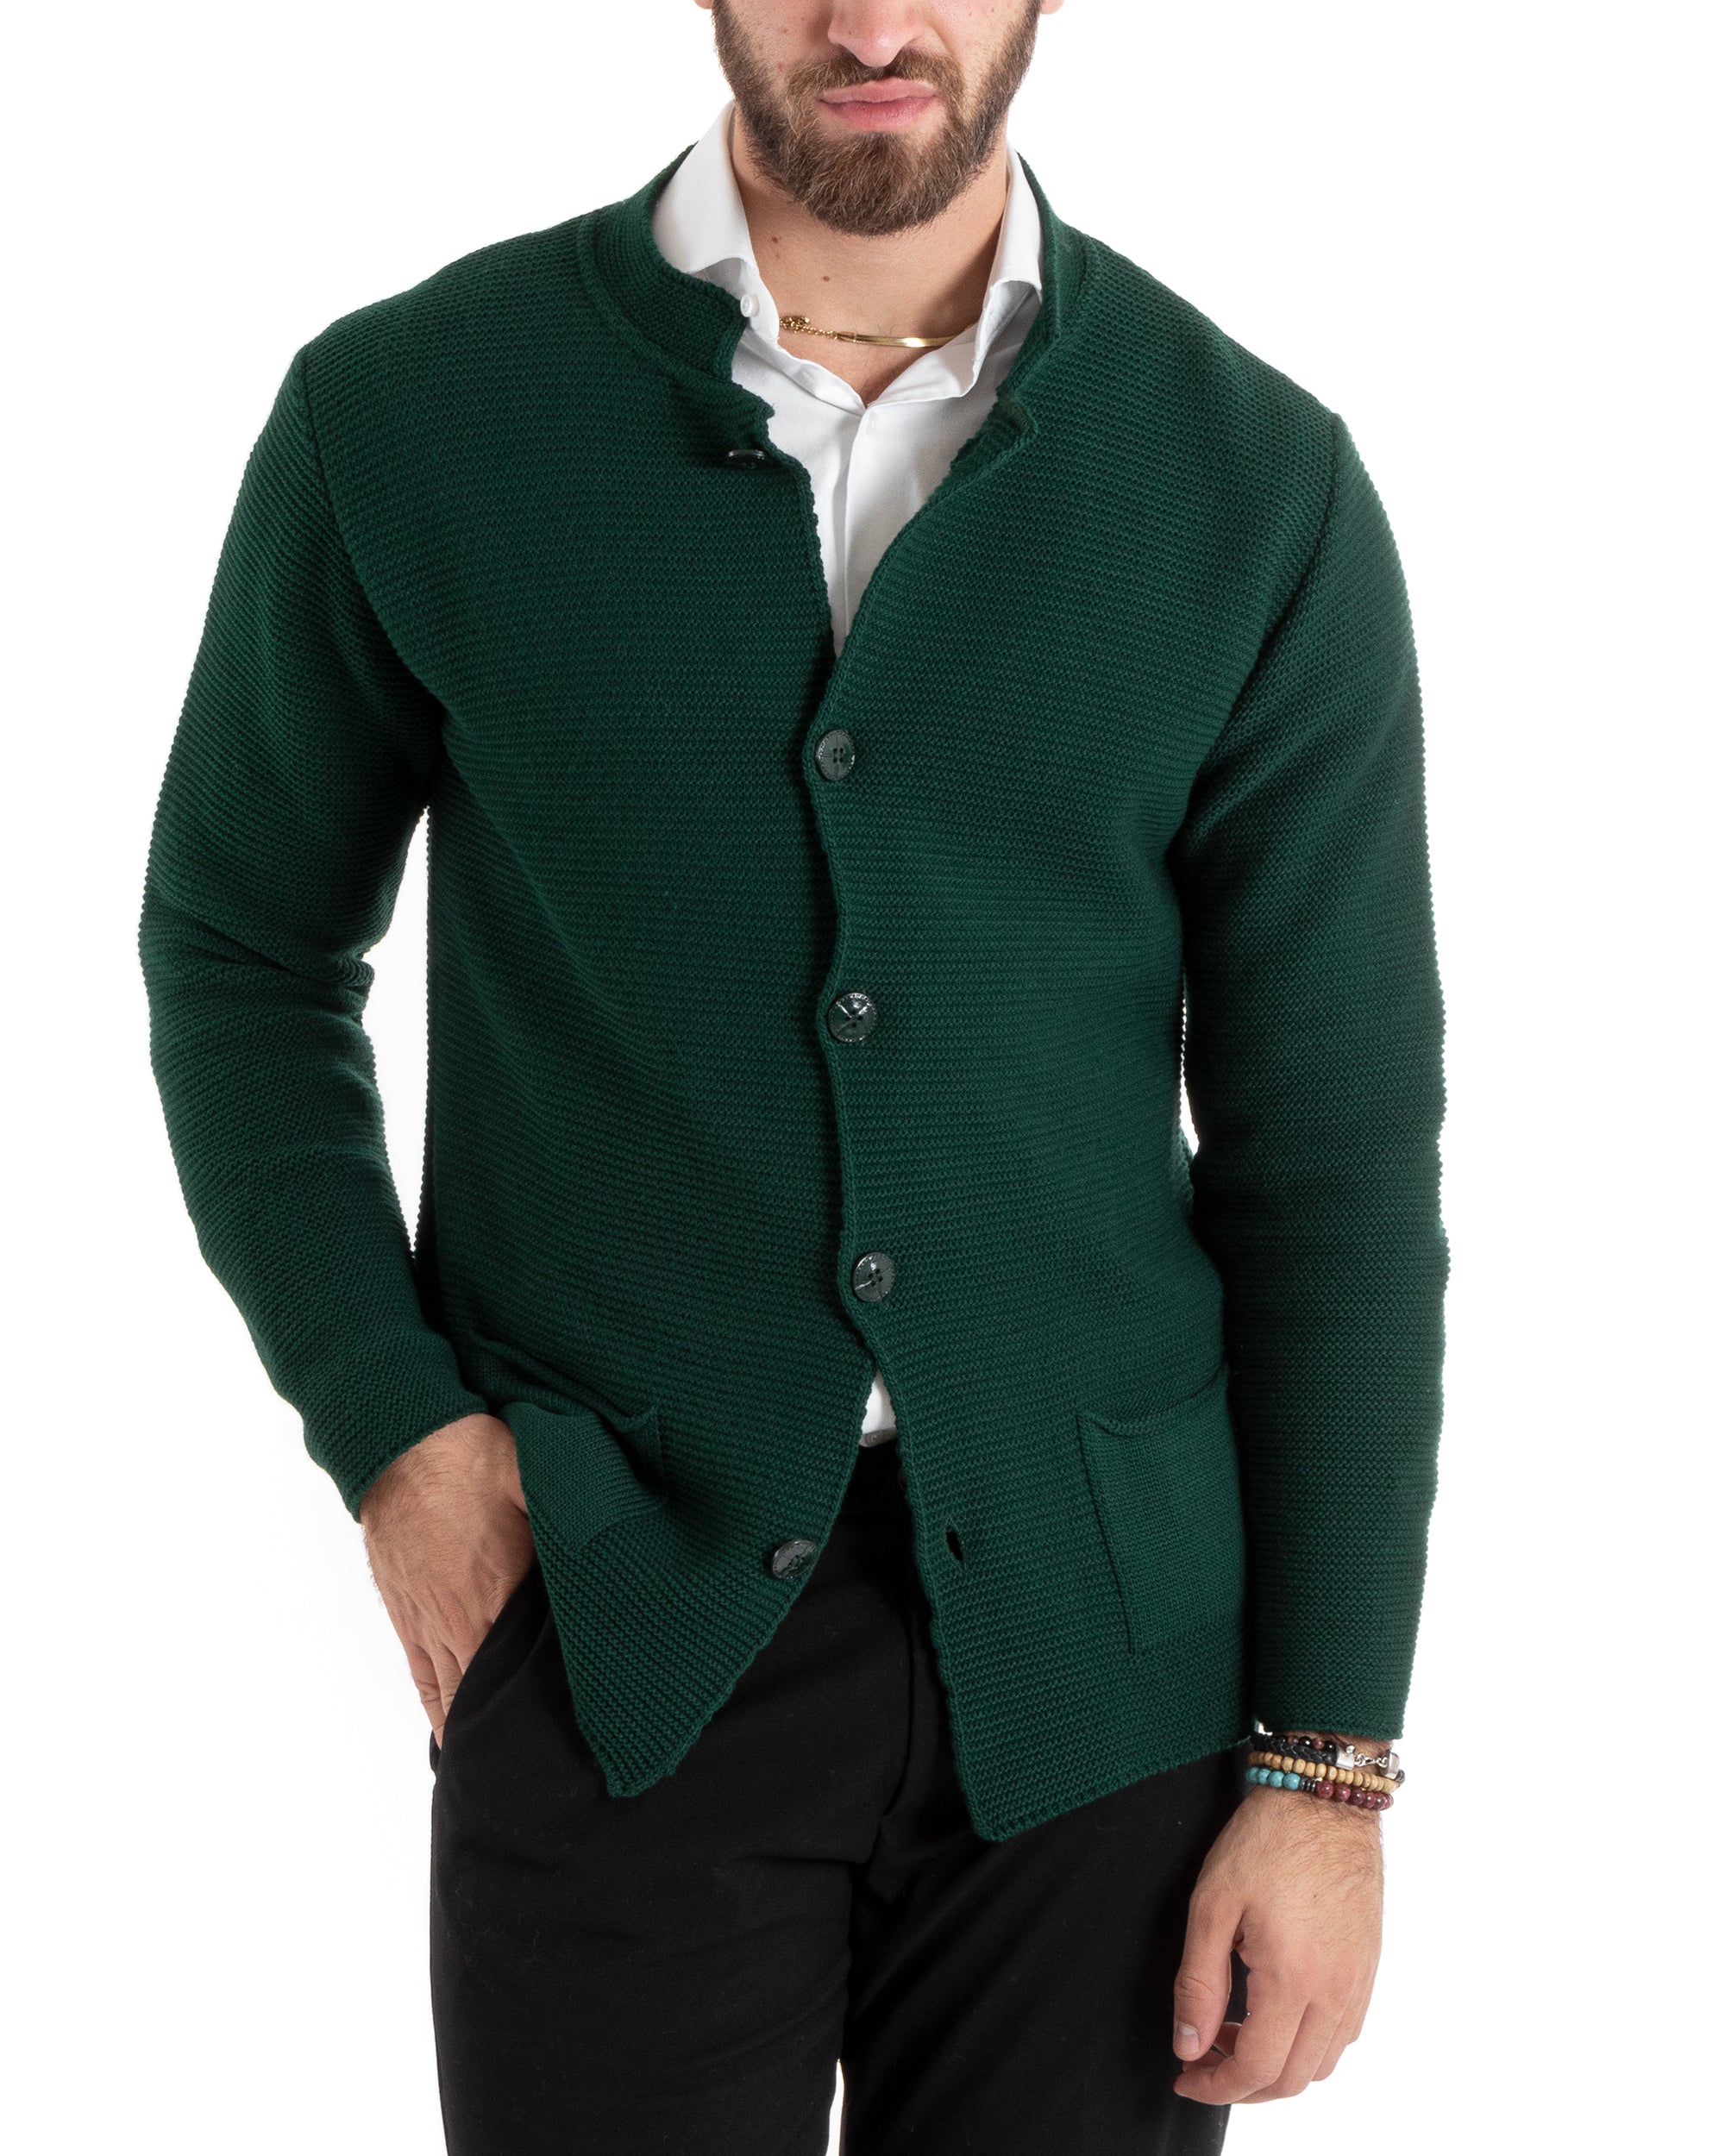 Men's Cardigan Korean Collar Single-breasted Sweater Knitted Jacket With Buttons Casual Green GIOSAL-M2673A